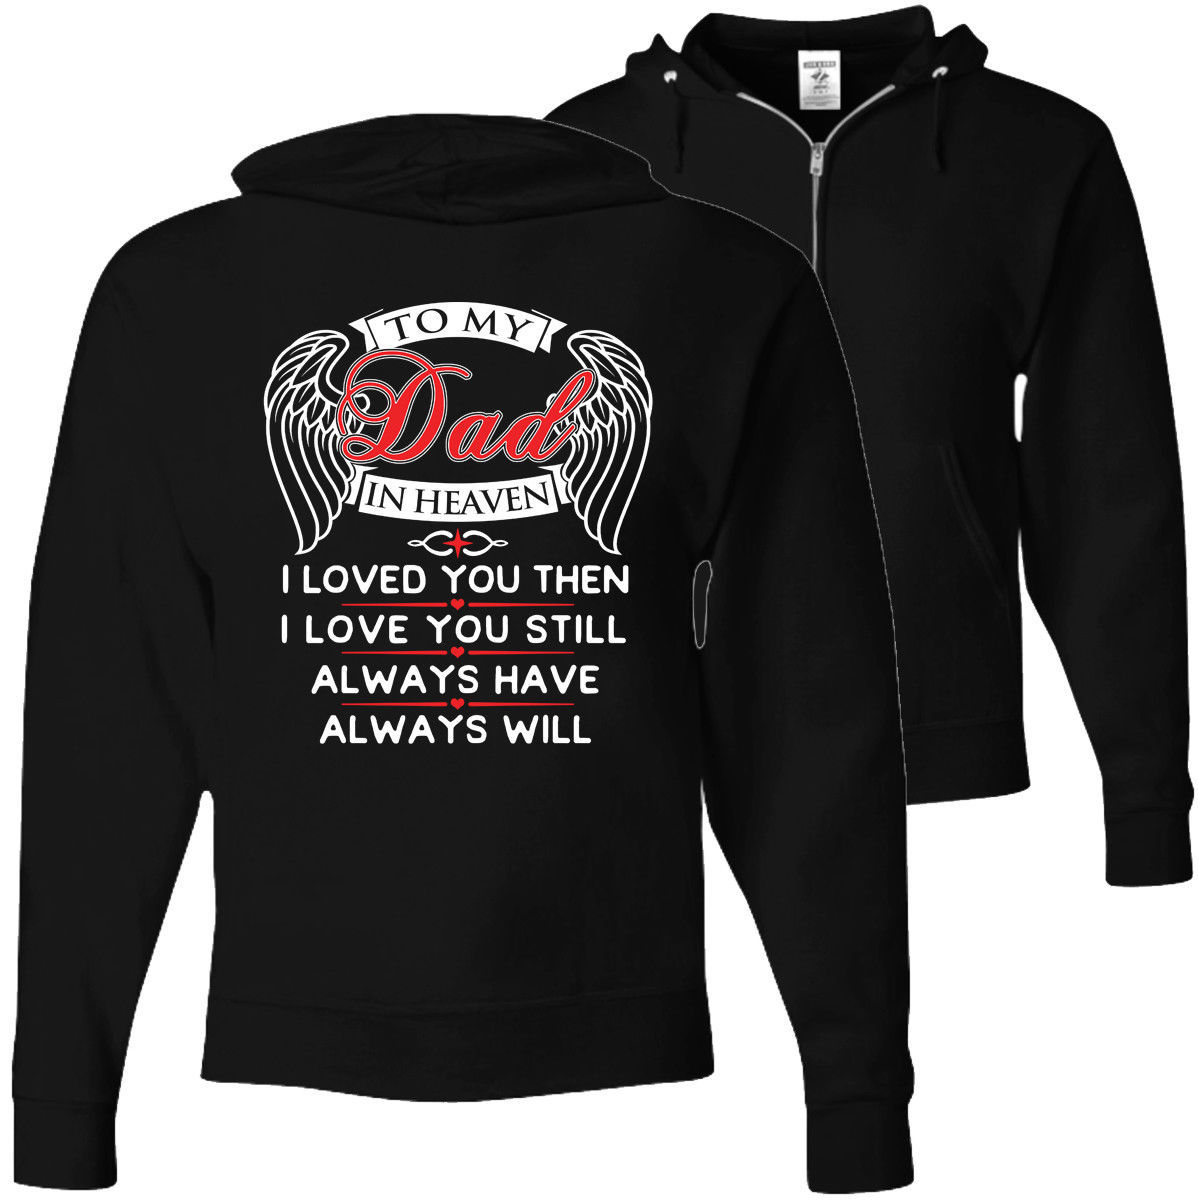 To my Dad in heaven I Love You Always Have Always Will - Zip Hoodie